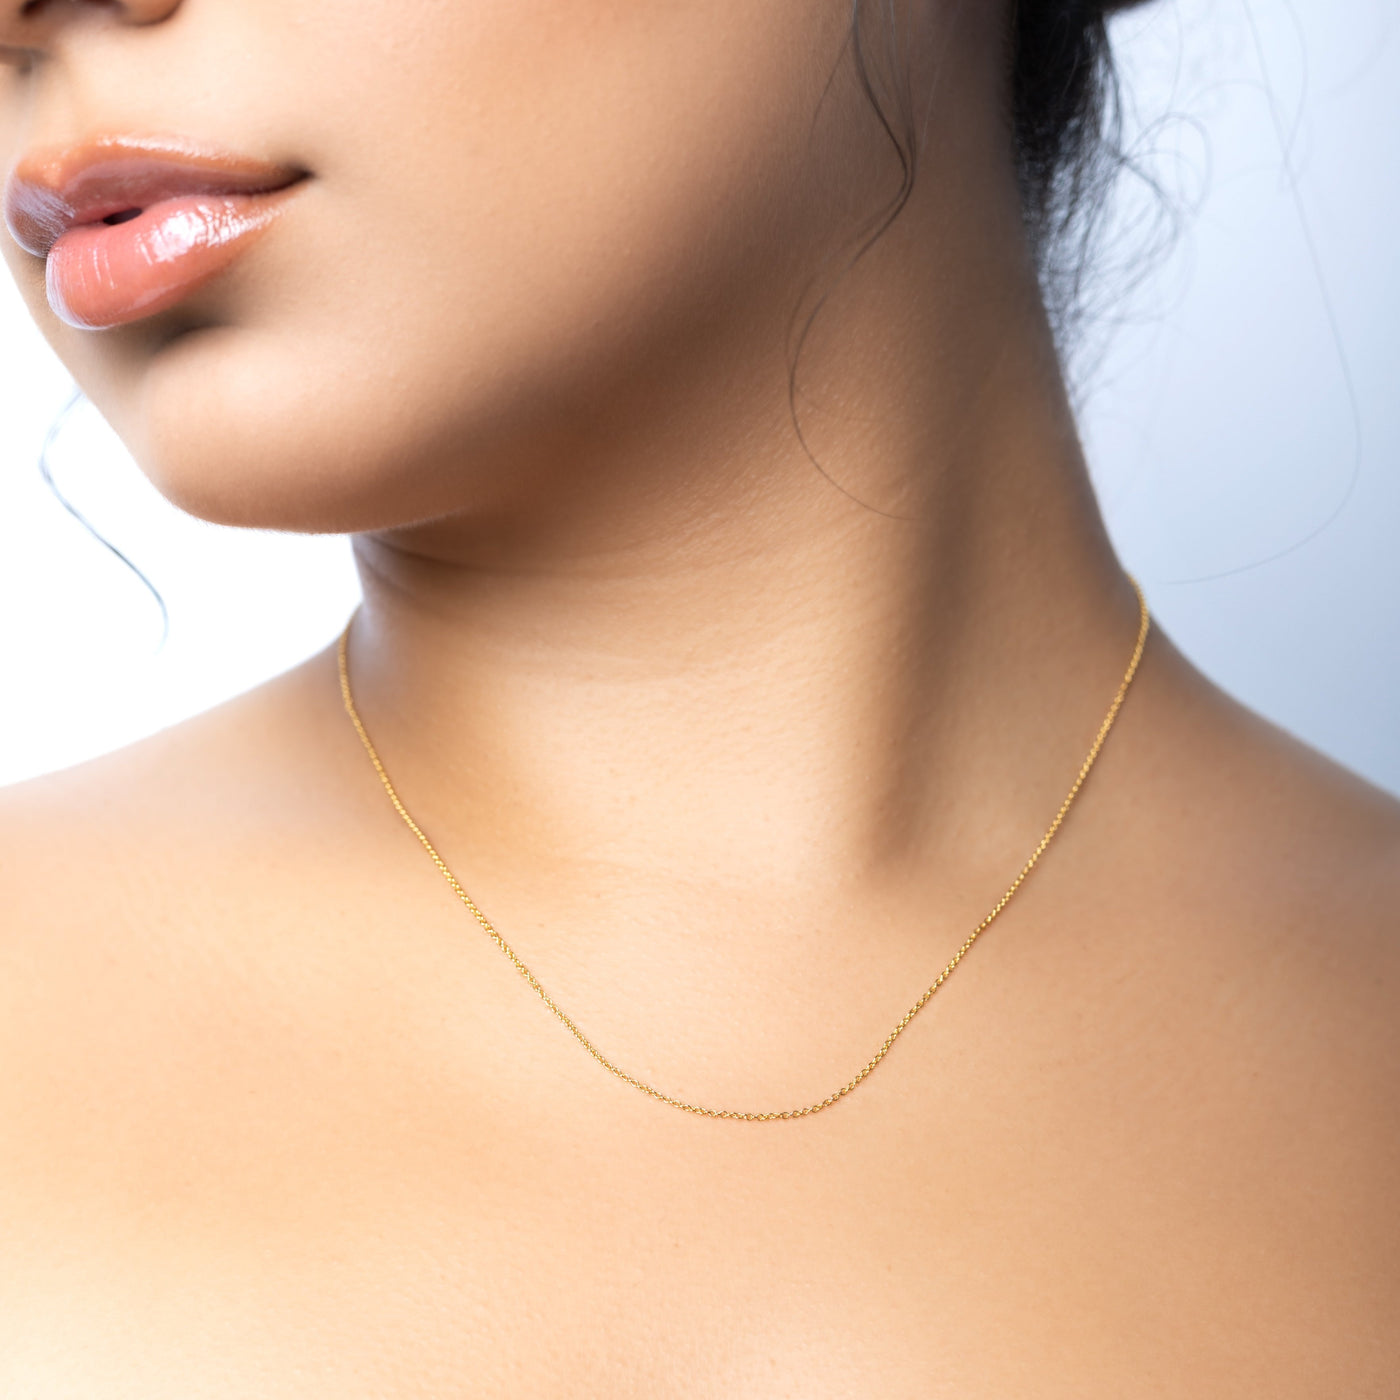 Modern Minimalist Jewelry Women's Necklace Choker Thin Slick Cable Chain 1mm 18k Gold layered on 925 Sterling Silver